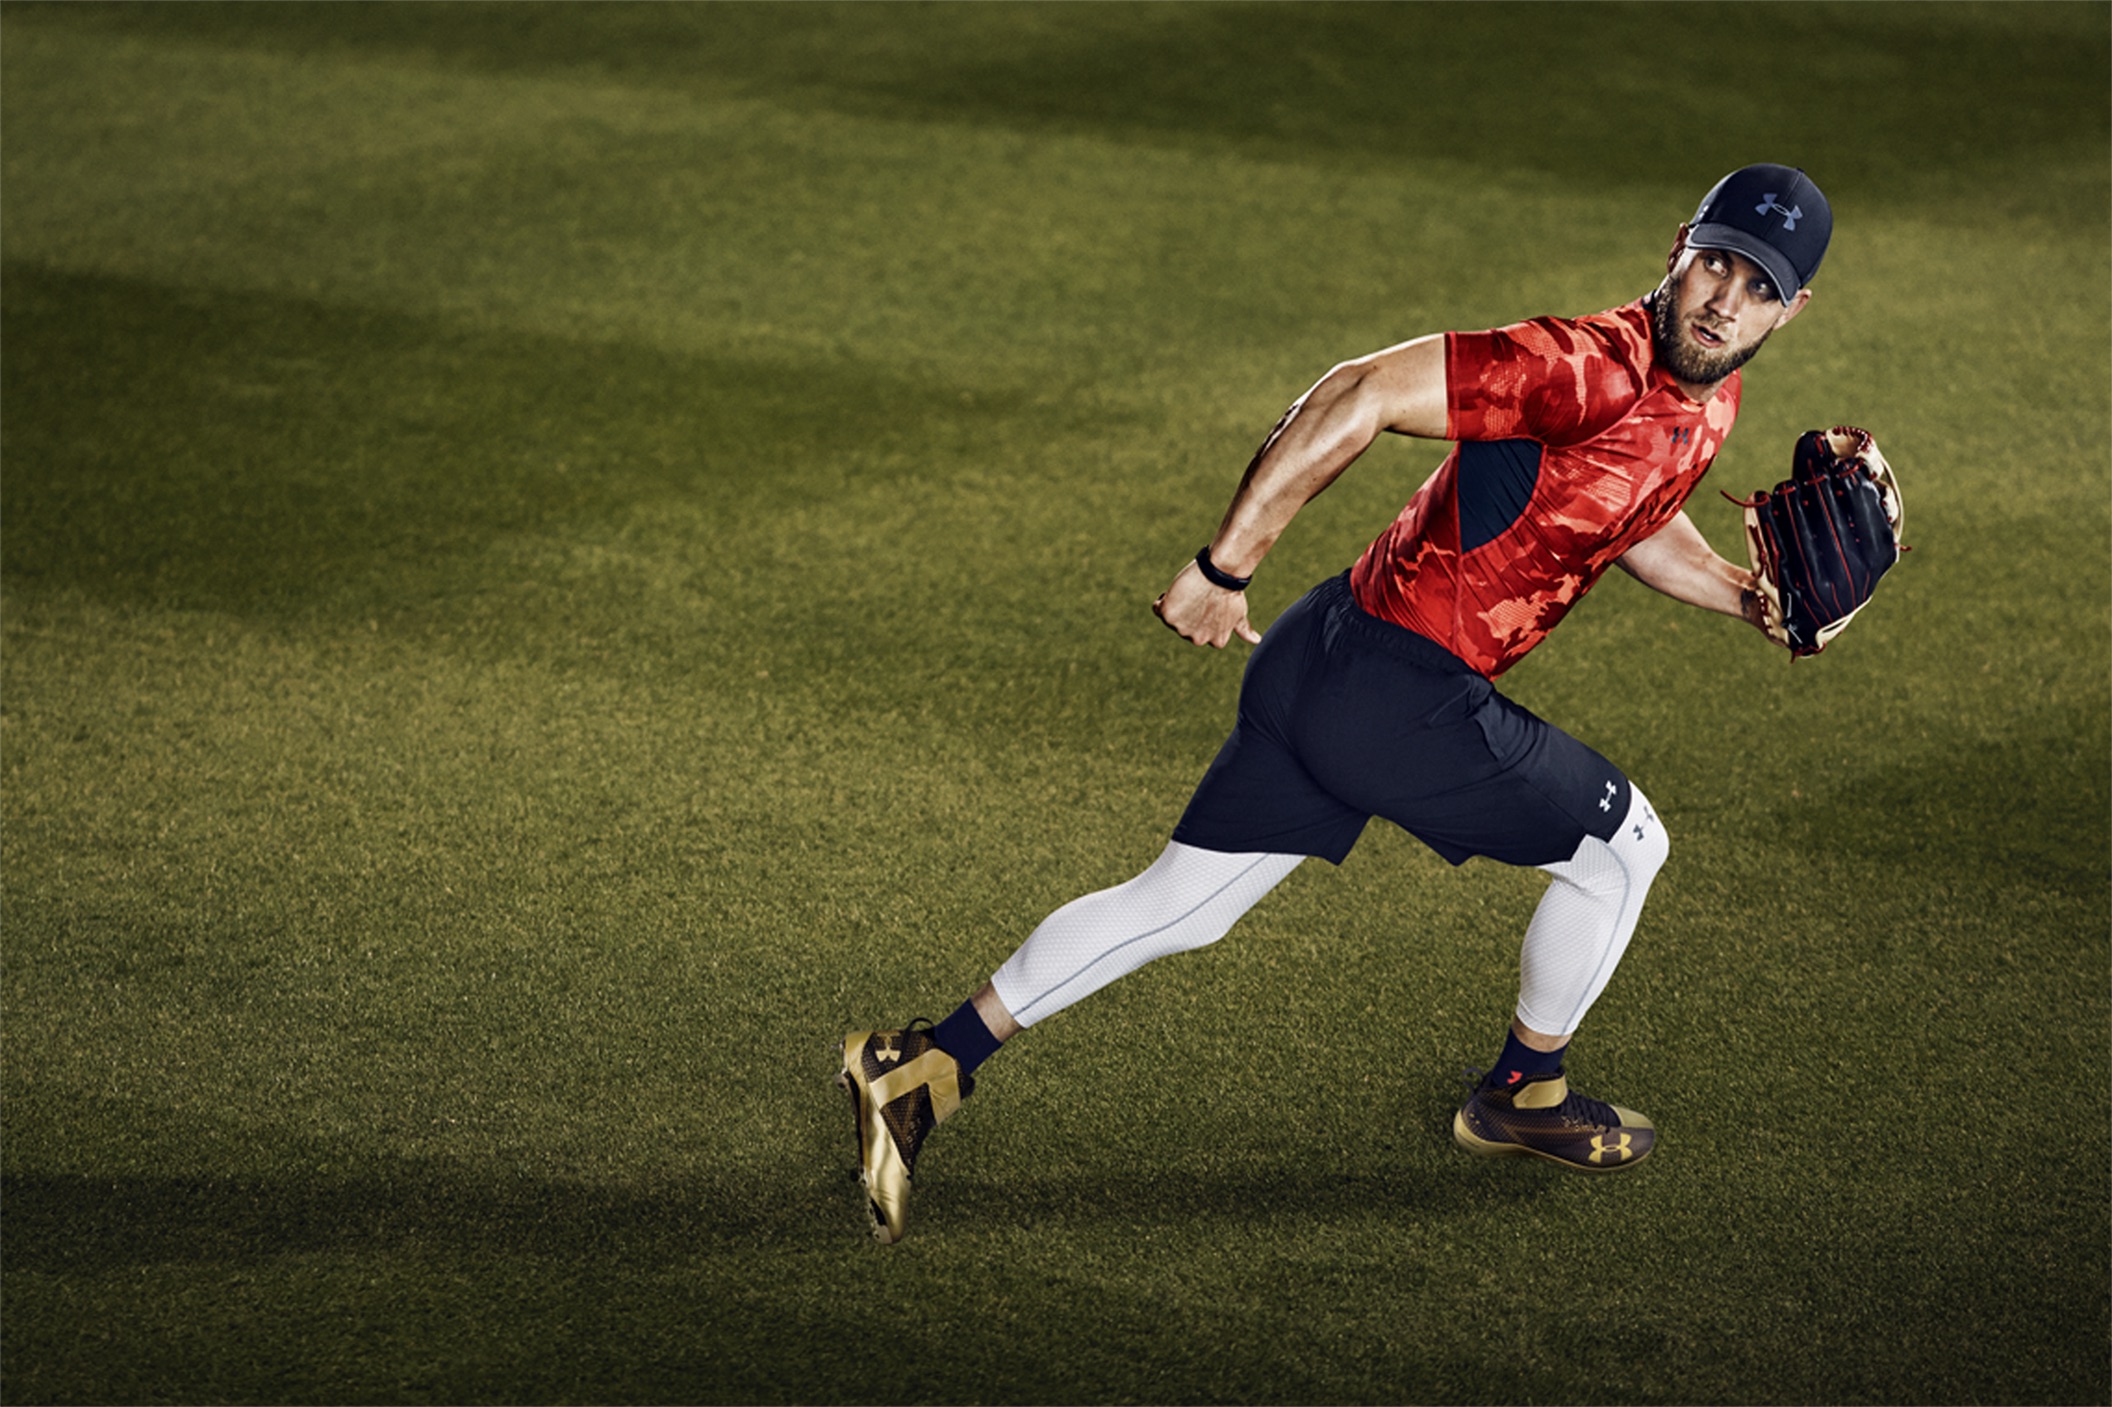 the stirring new Under Armour ad featuring Bryce Harper | For The Win